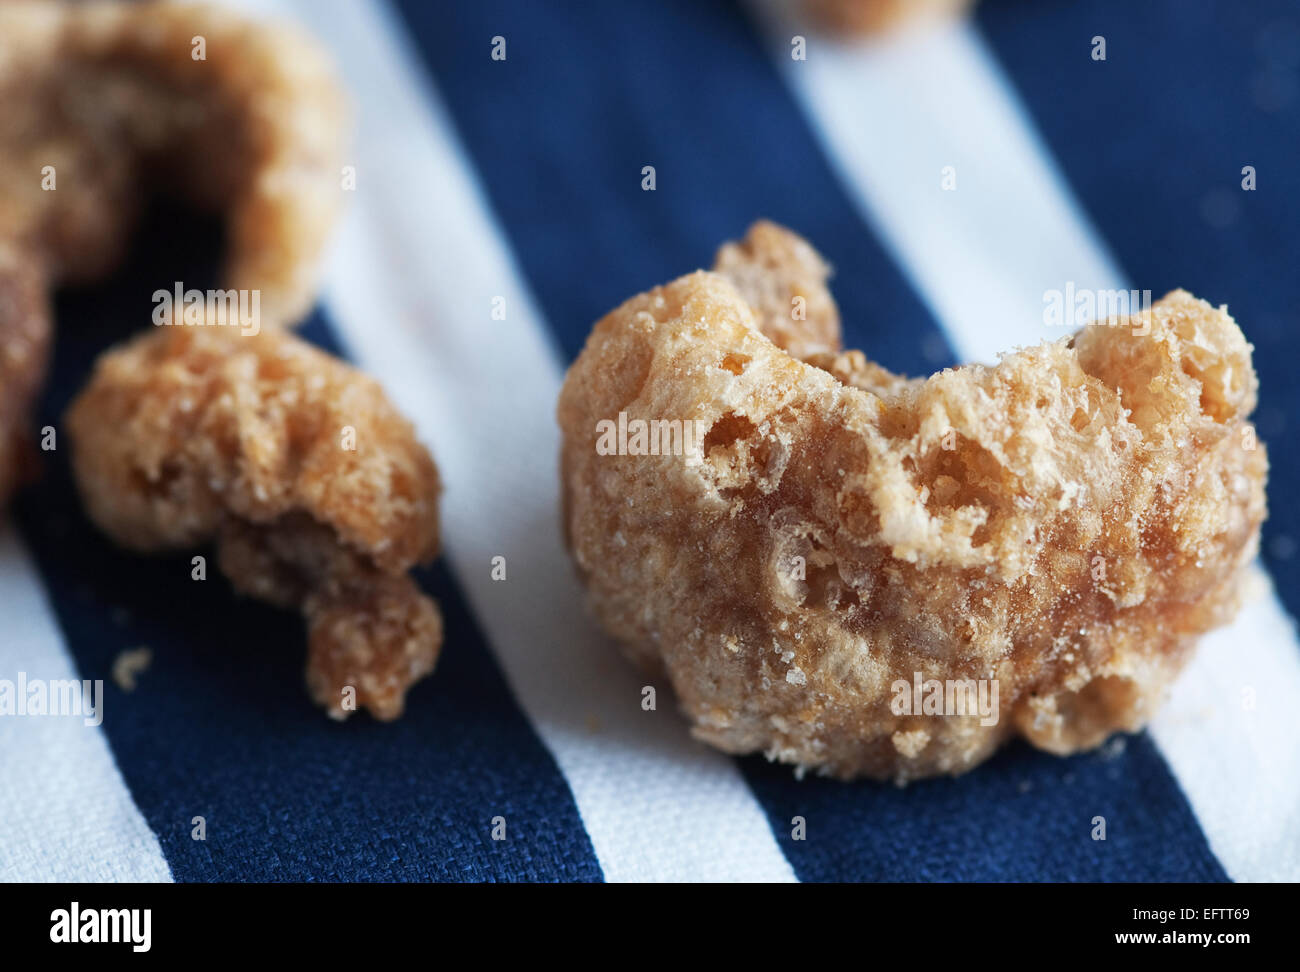 Still life food image of Pork Scratchings Crackling Snack Stock Photo